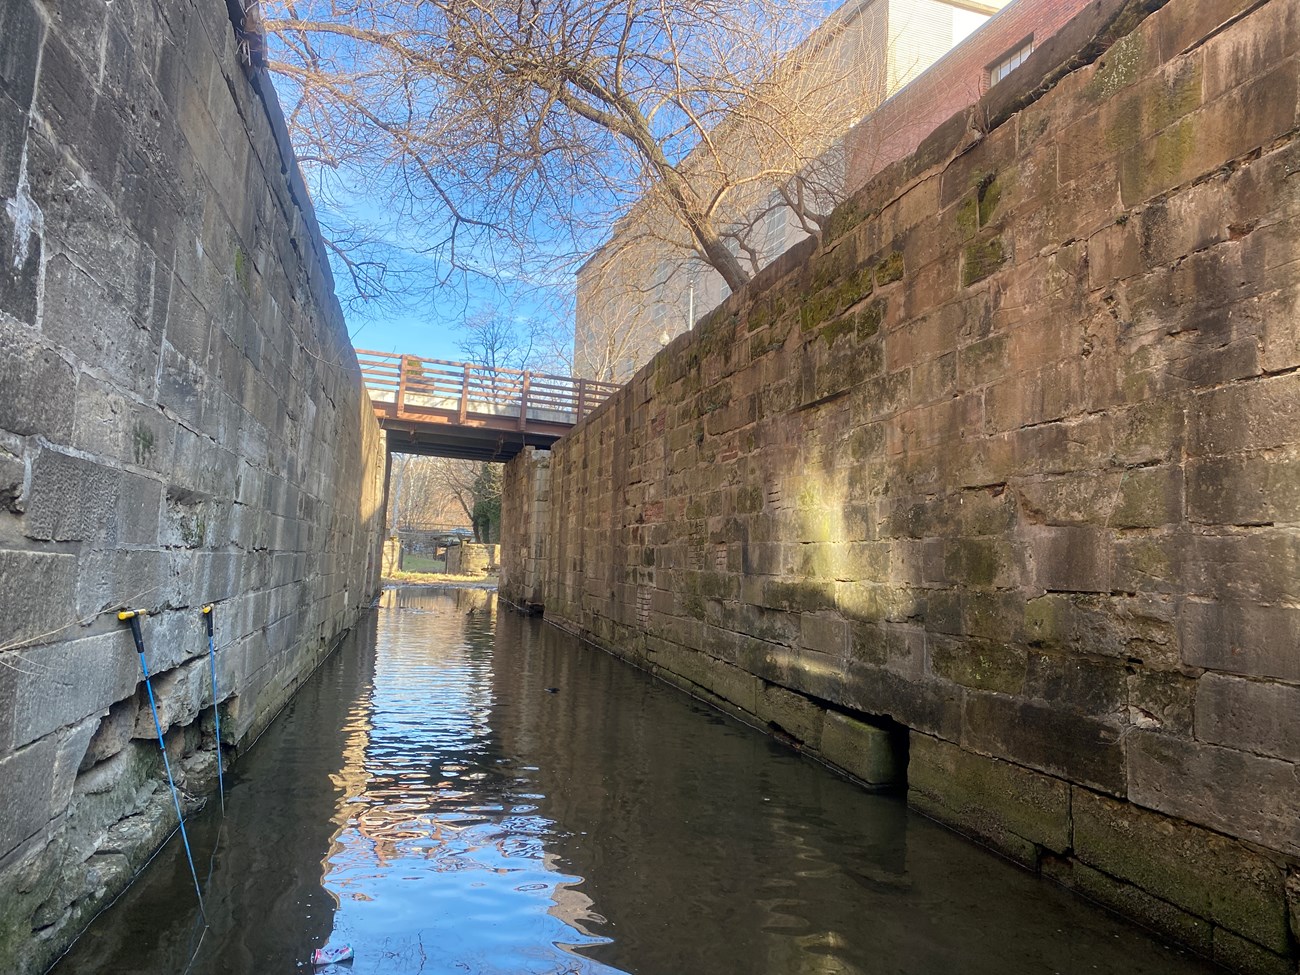 Photo from inside lock 2. There is standing water and masonry walls framing image.